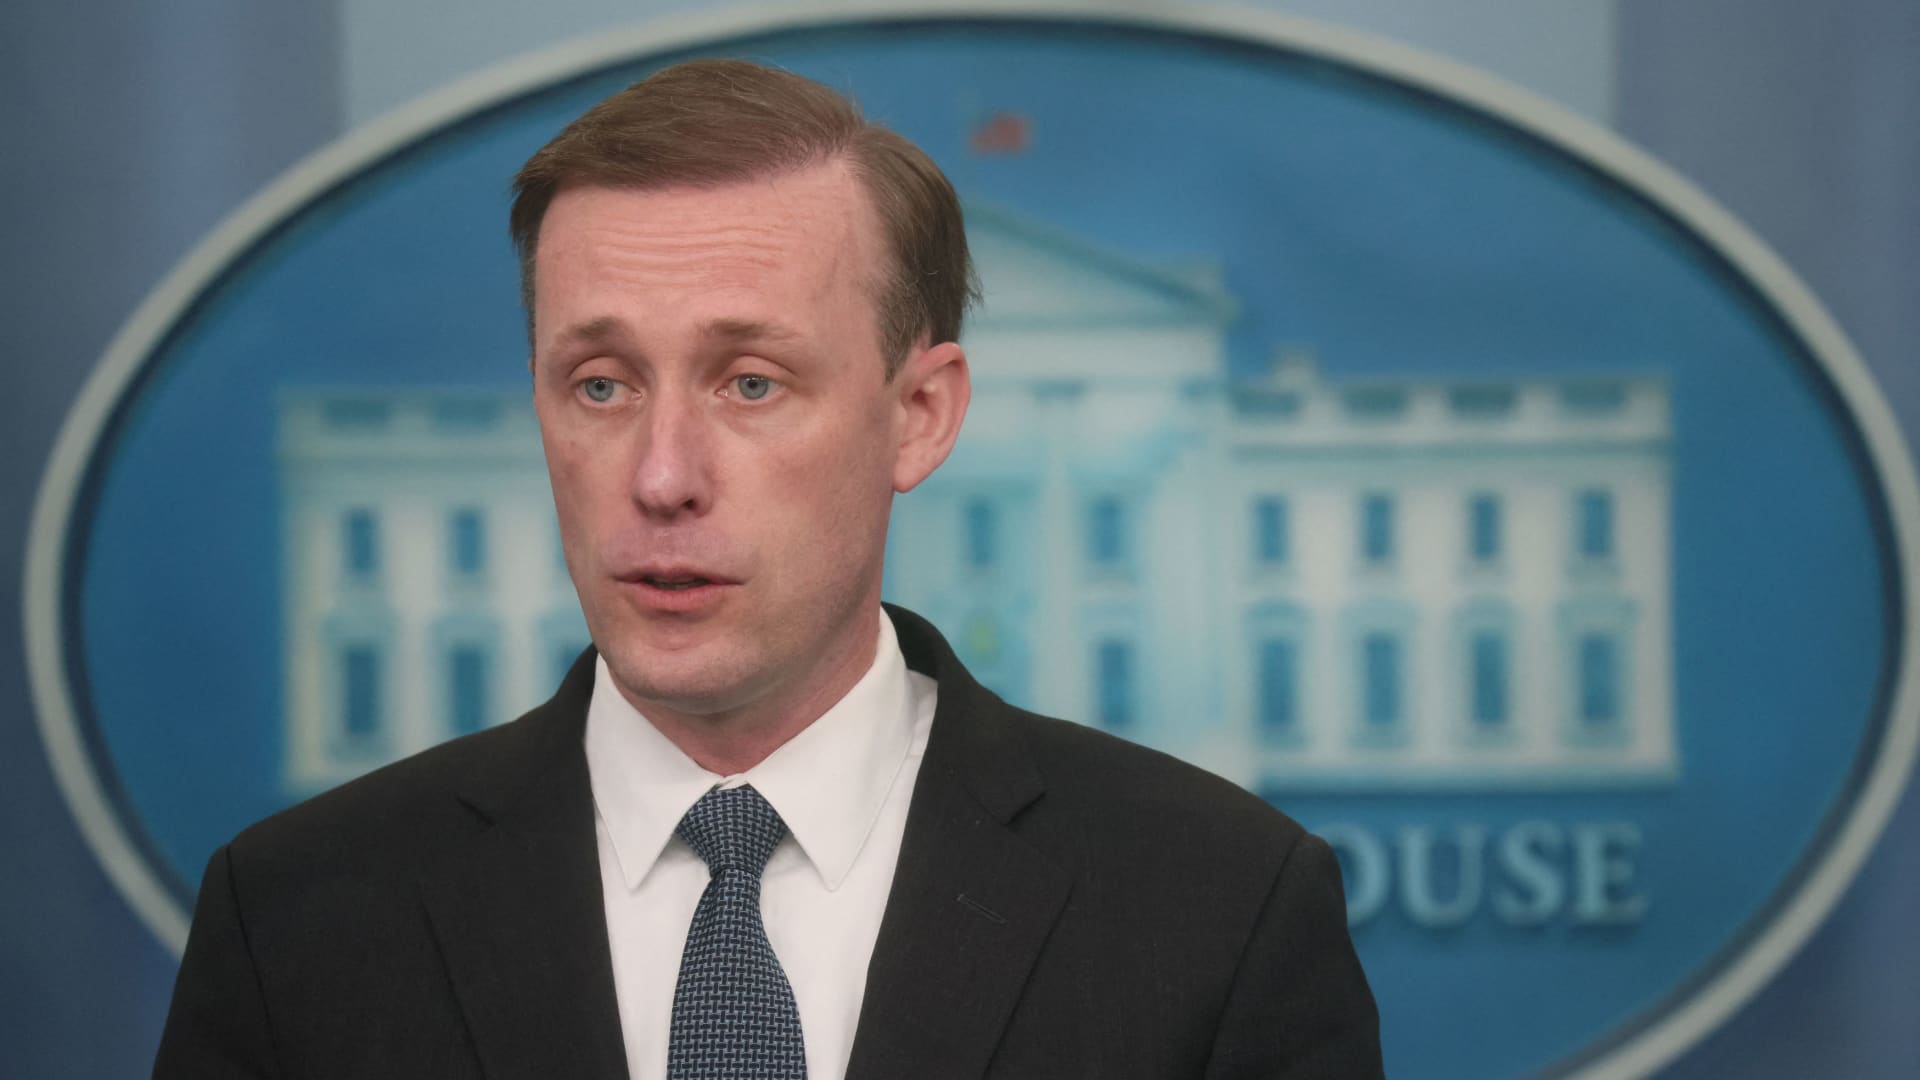 U.S. National Security Advisor Jake Sullivan speaks to the media about the war in Ukraine and other topics at the White House in Washington, U.S., March 22, 2022.